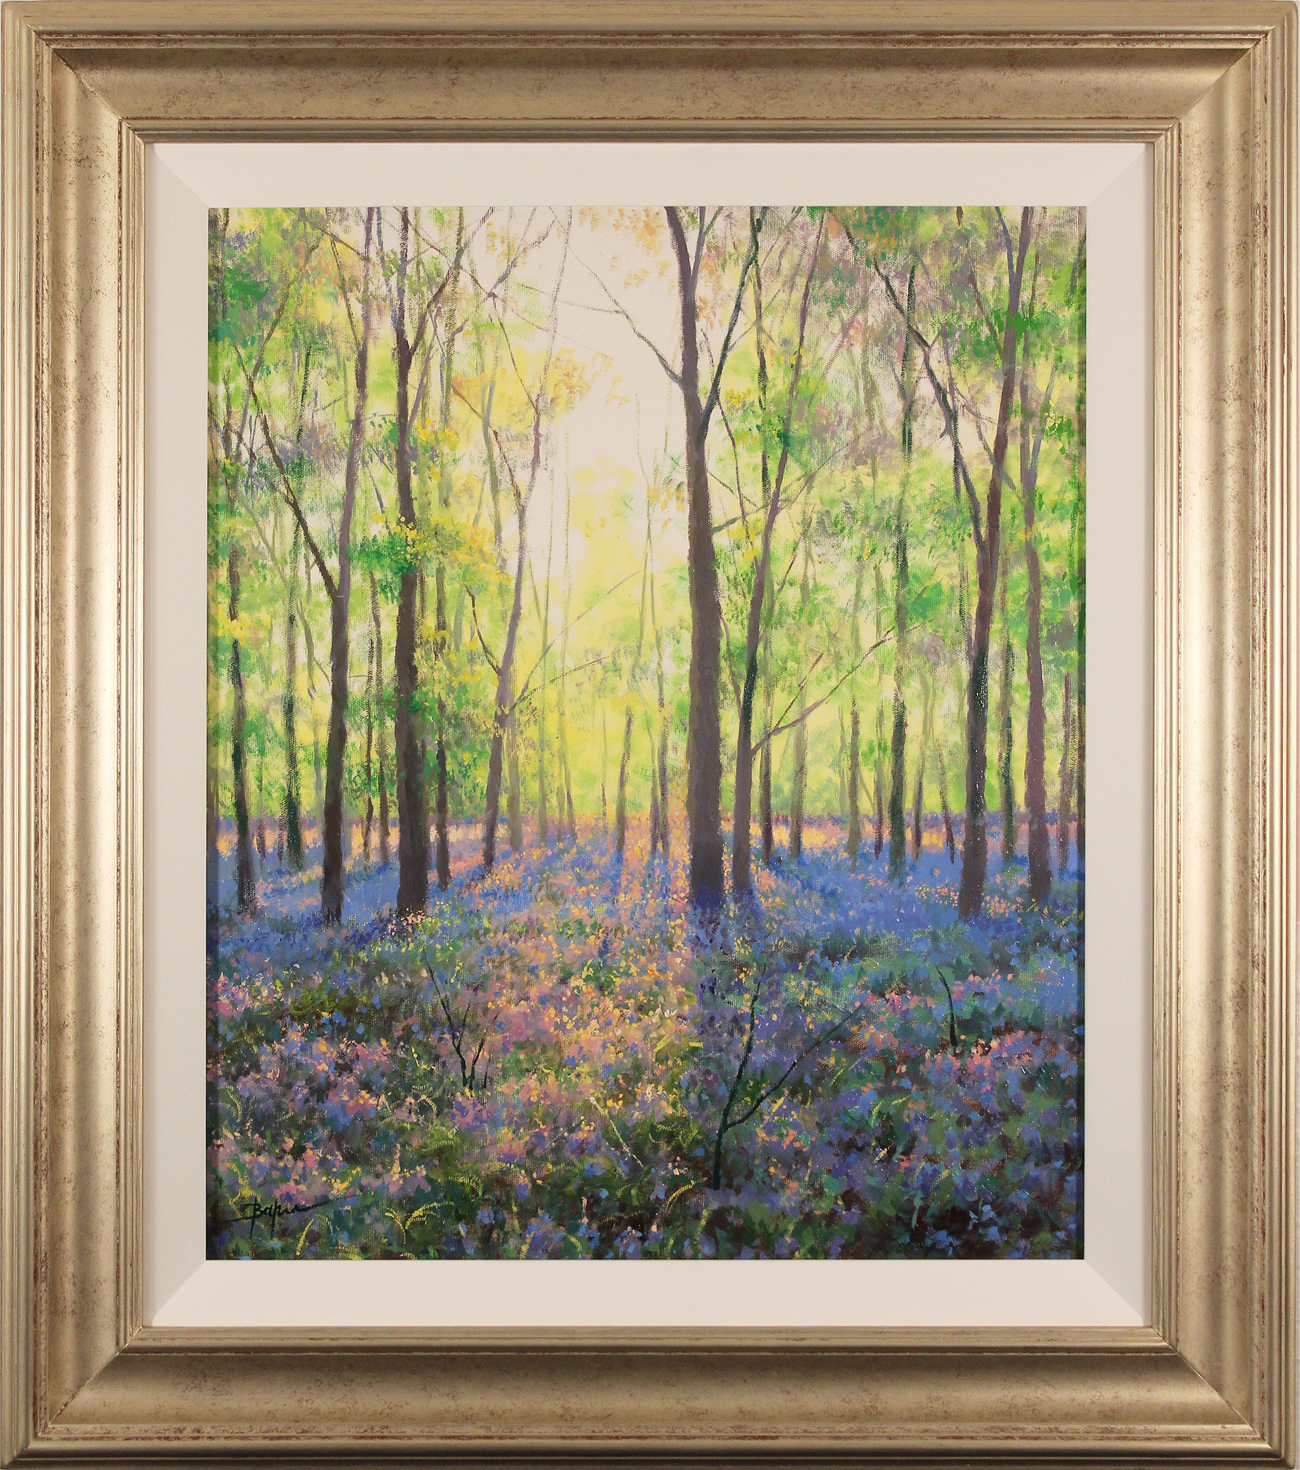 Alan Barker, Original oil painting on canvas, The Bluebell Wood. Click to enlarge